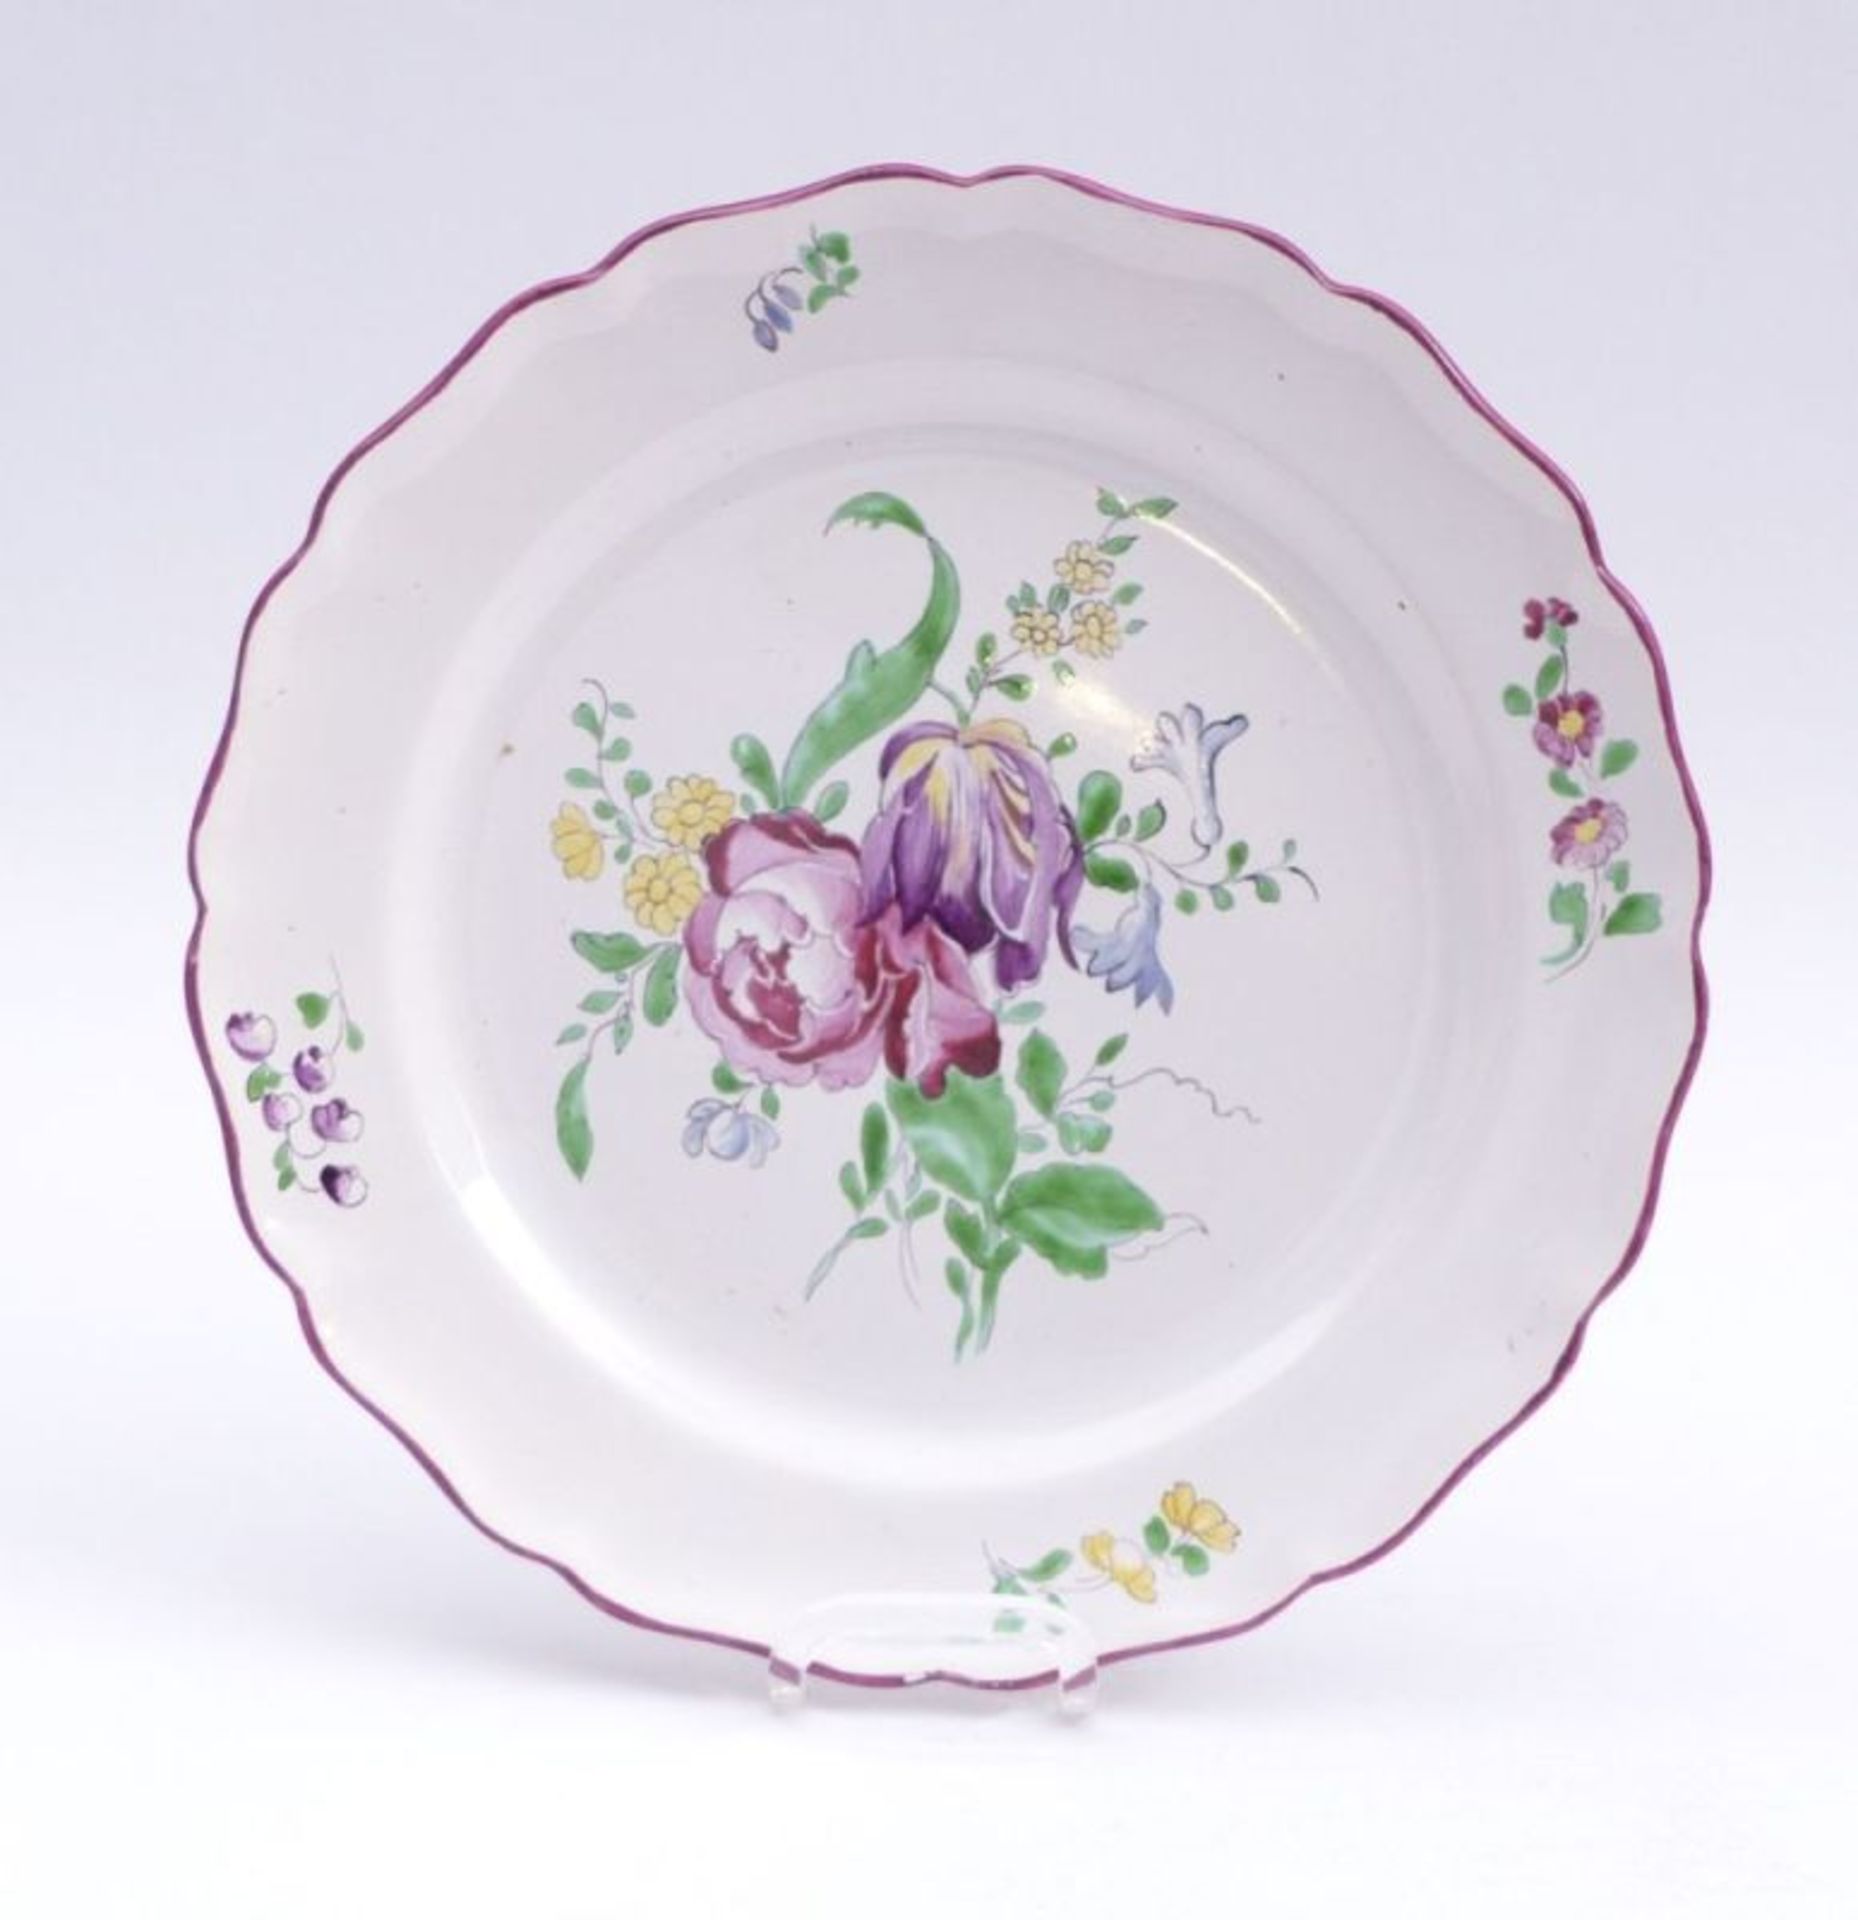 Flower plateStrasbourg, 19th c.Small, round form with multiple curved ''Baroque'' edge; large flower